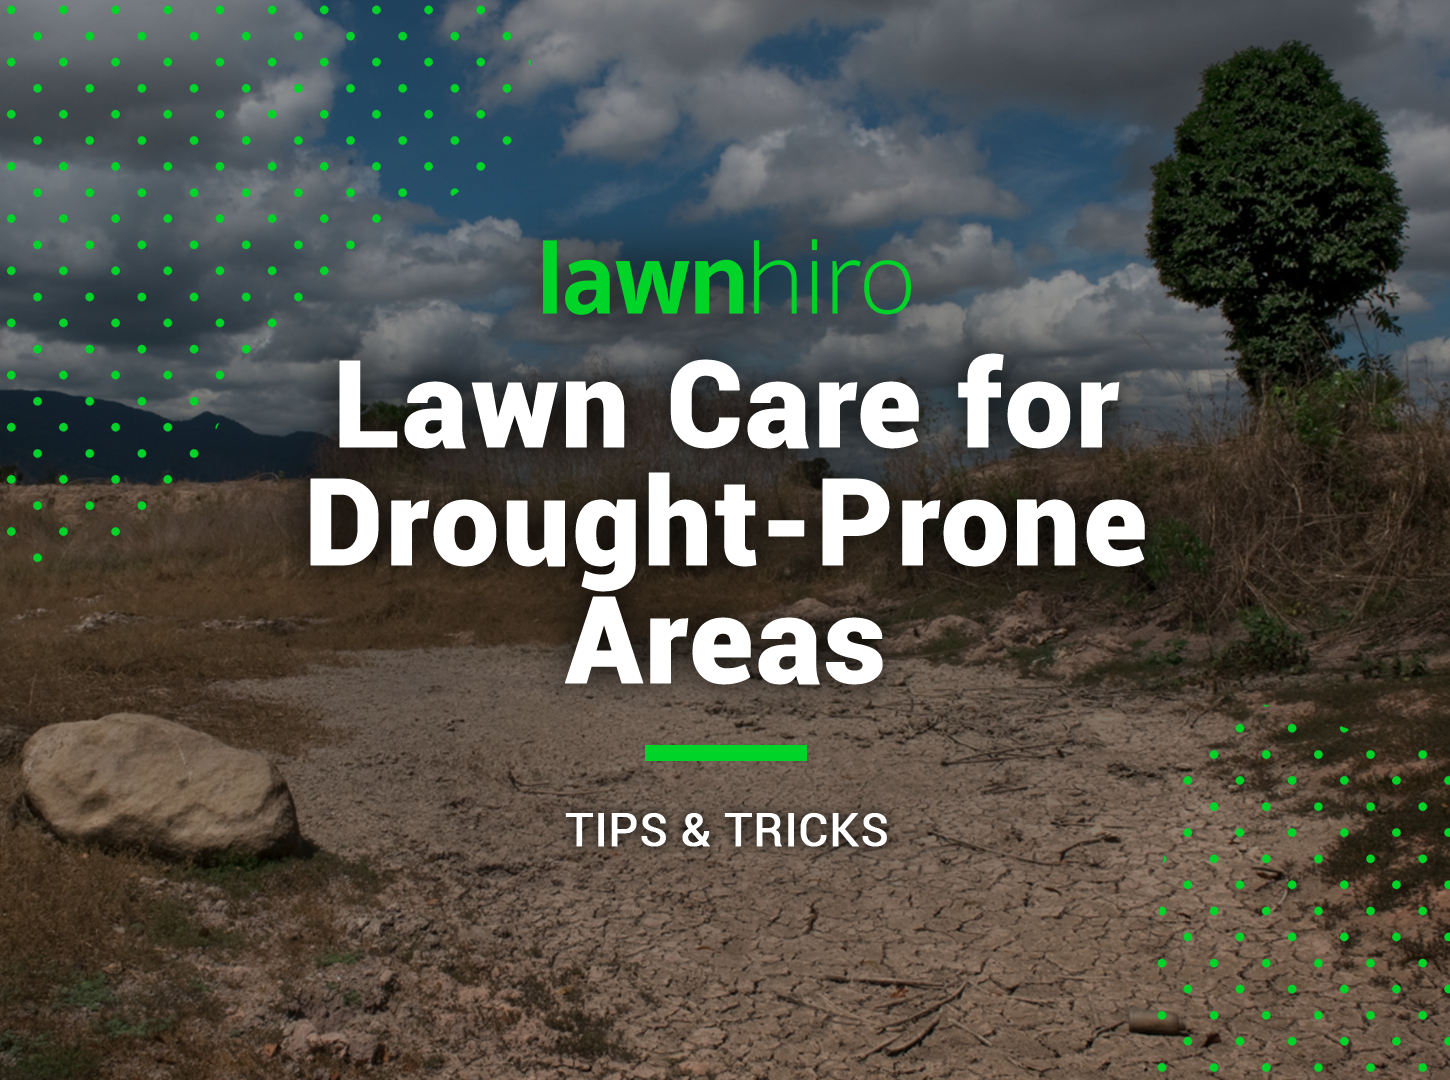 Tips for lawn care in drought-prone areas - Lawnhiro